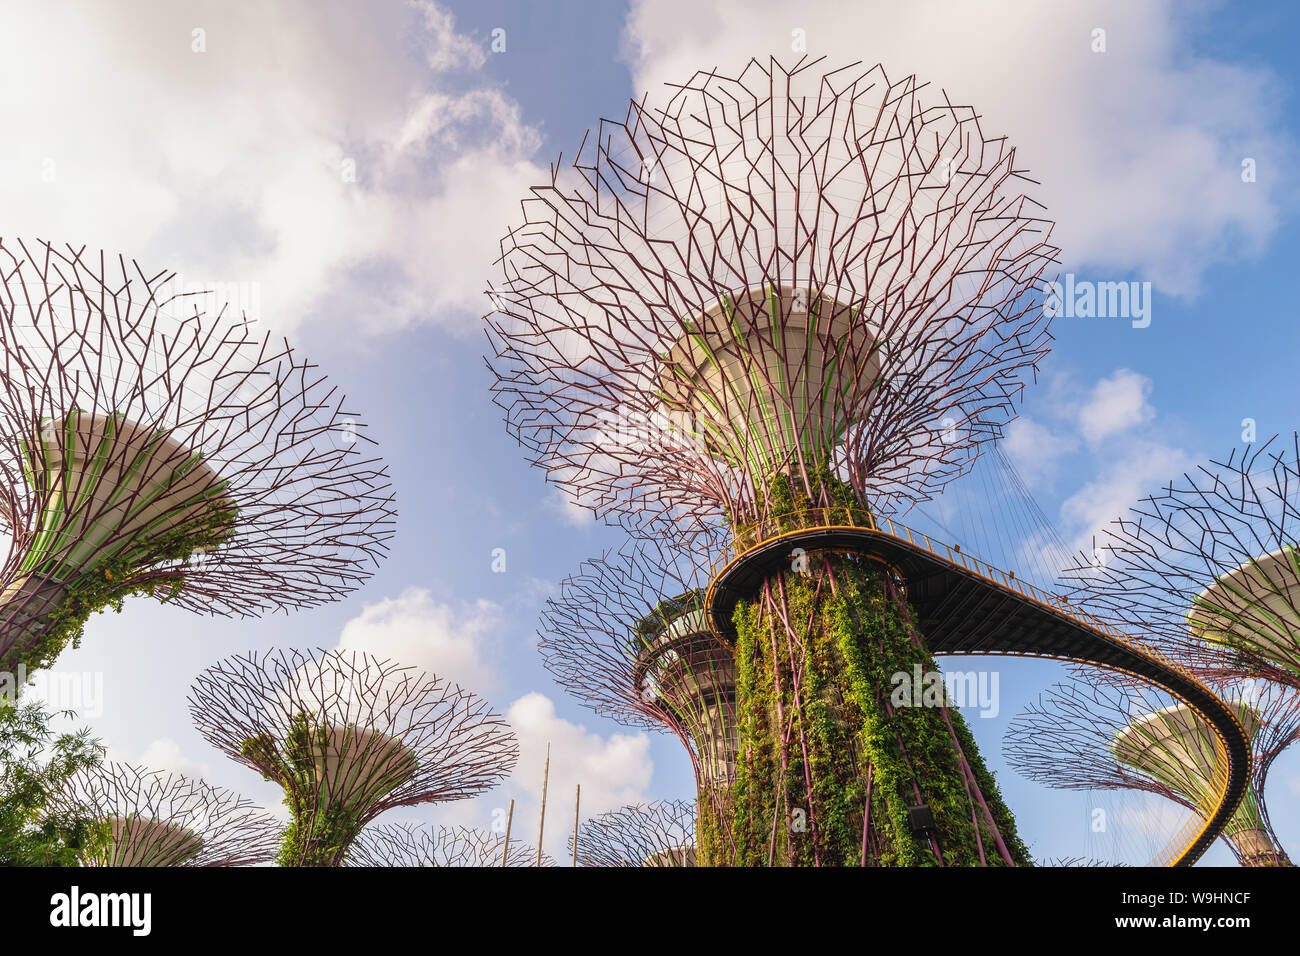 MARINA BAY, SINGAPOUR - 6 janvier 2019 : Singapore city skyline at Supertree Grove de Gardens By The Bay Banque D'Images